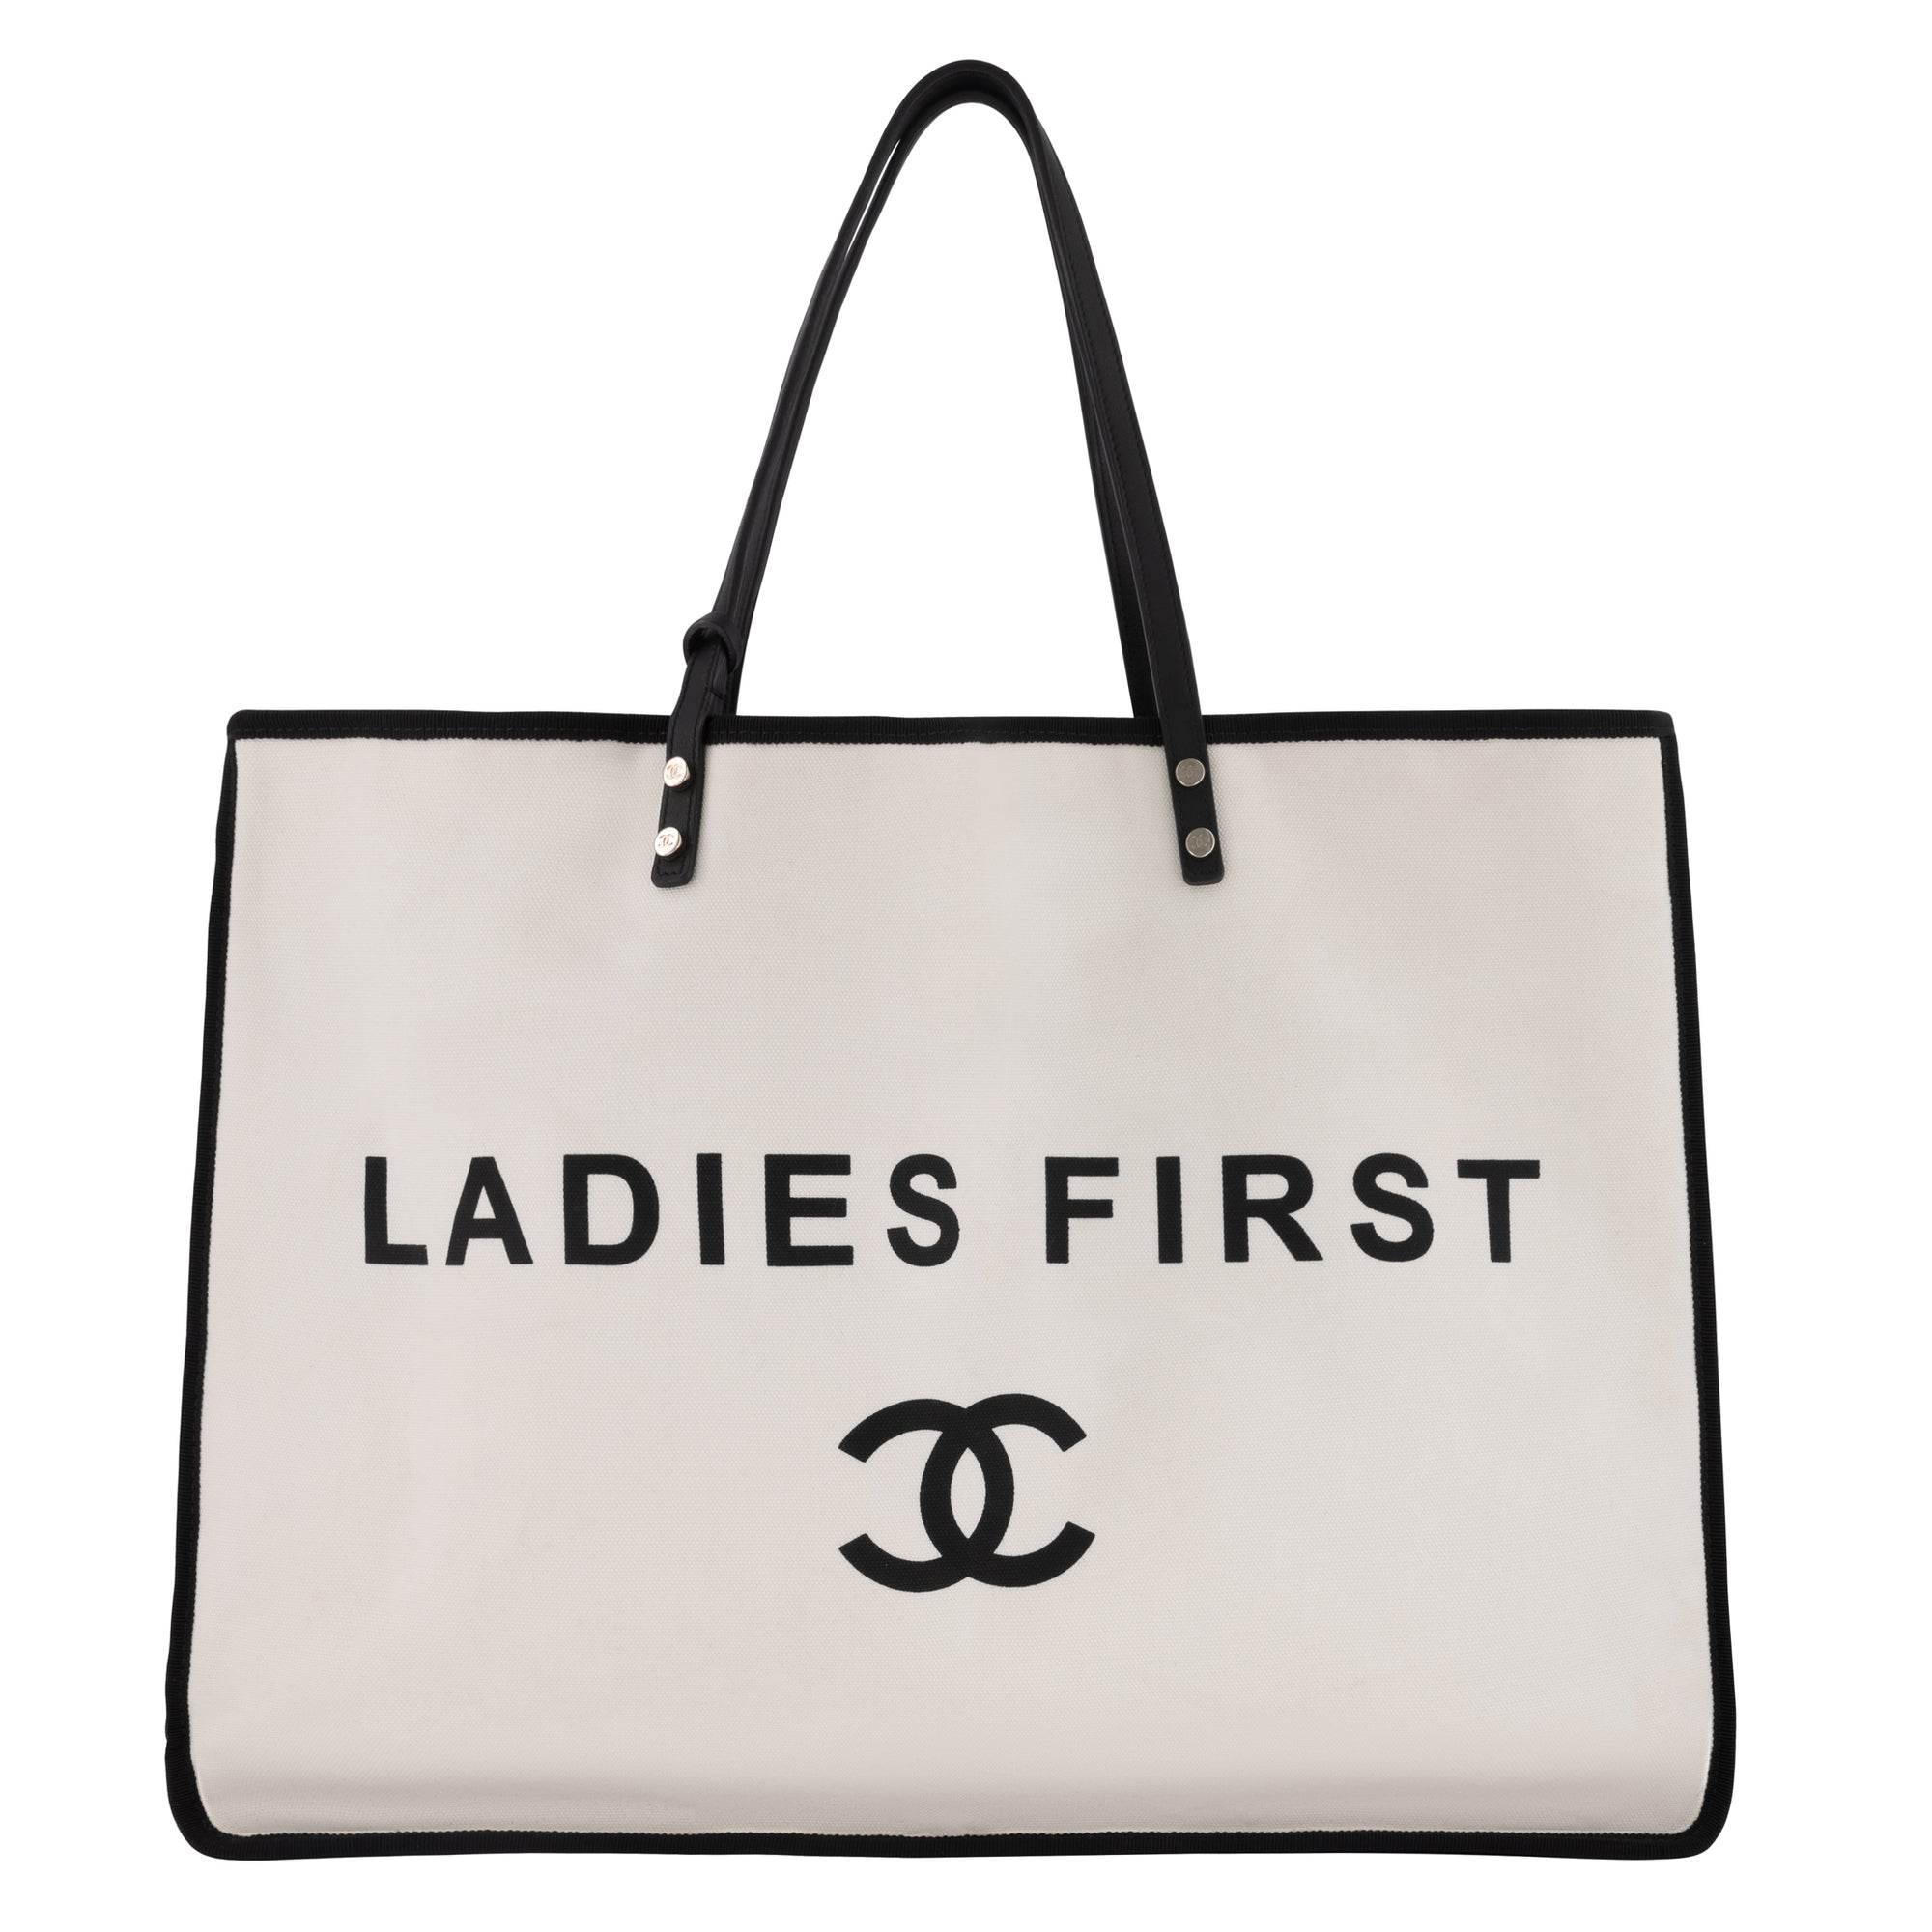 Chanel Large Ladies First Shopping Tote